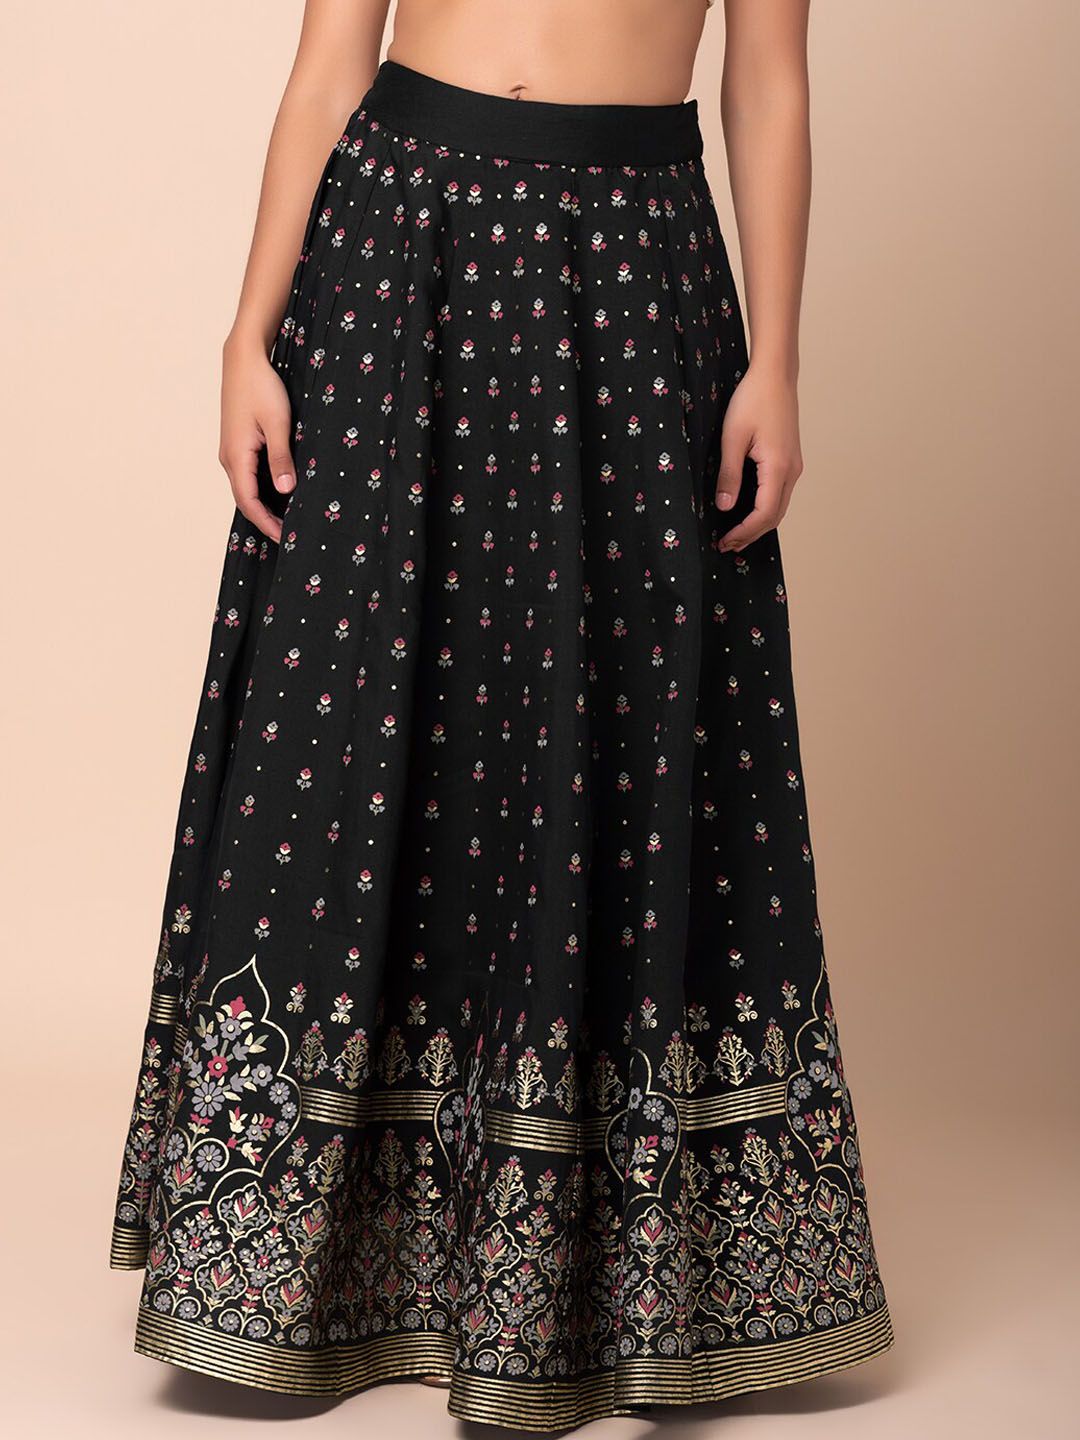 INDYA Floral Foil Printed Flared Skirt Price in India